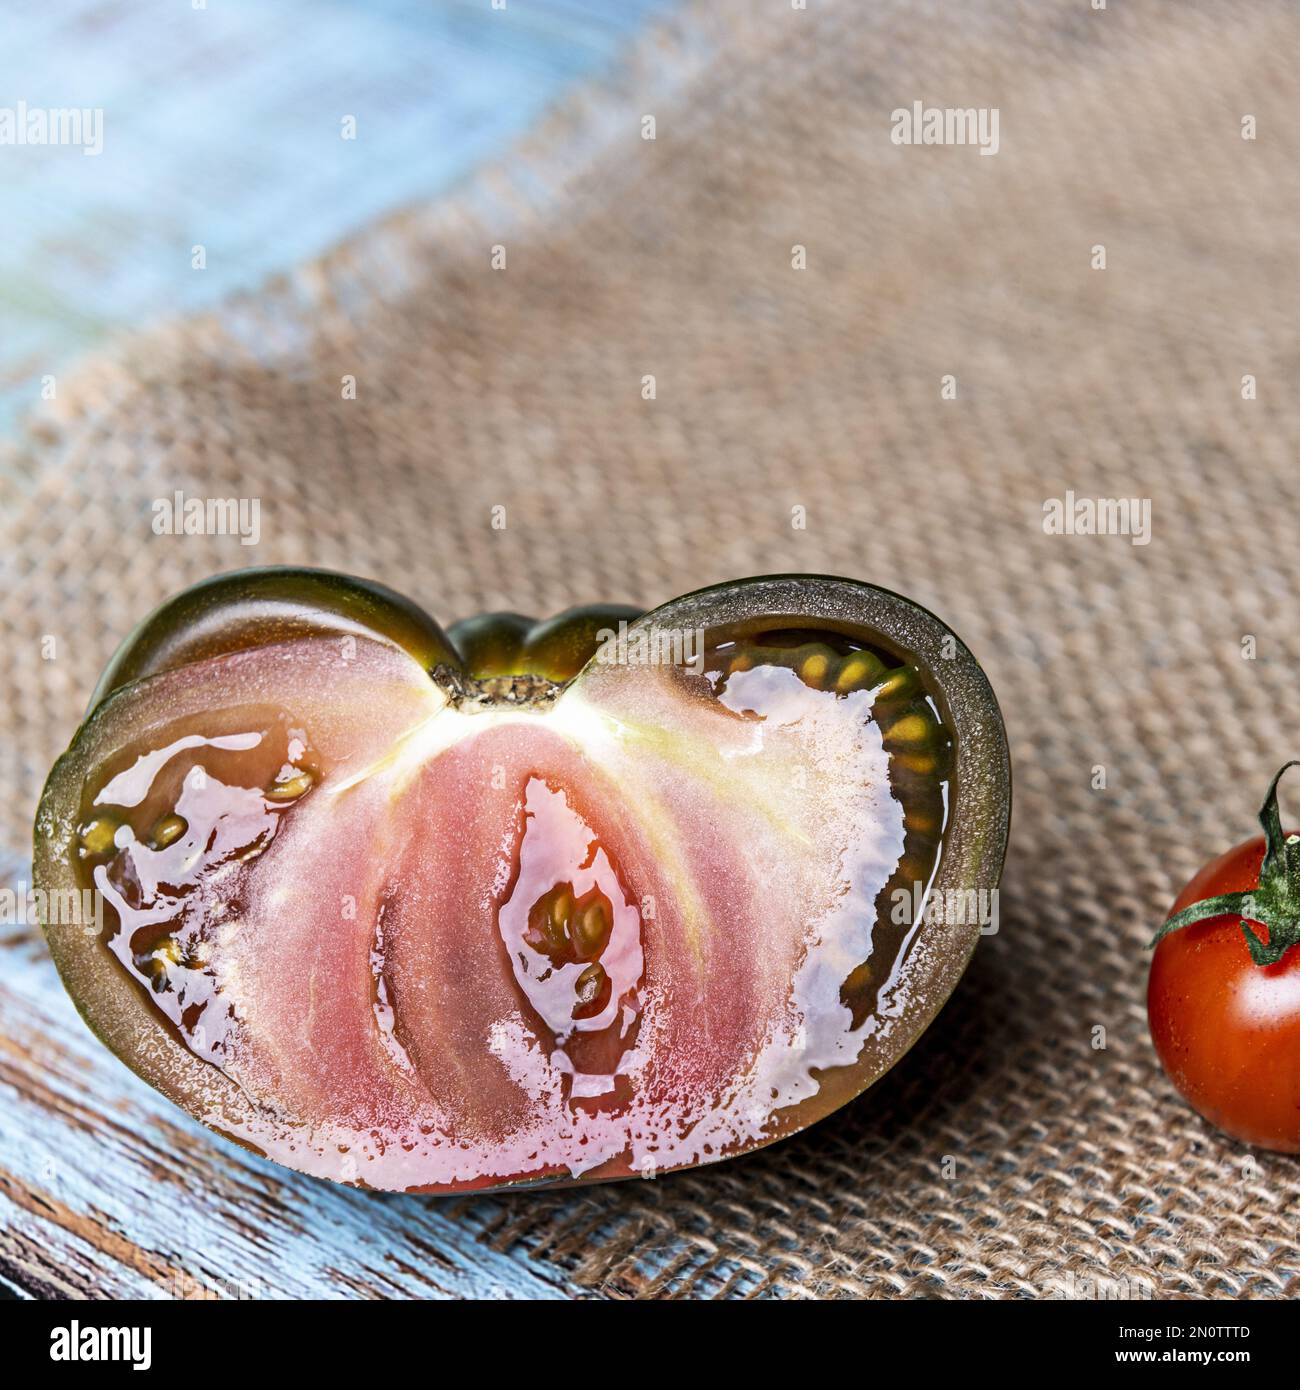 Image of a ripe sweet marmande tomato split in half looking delicious Stock Photo